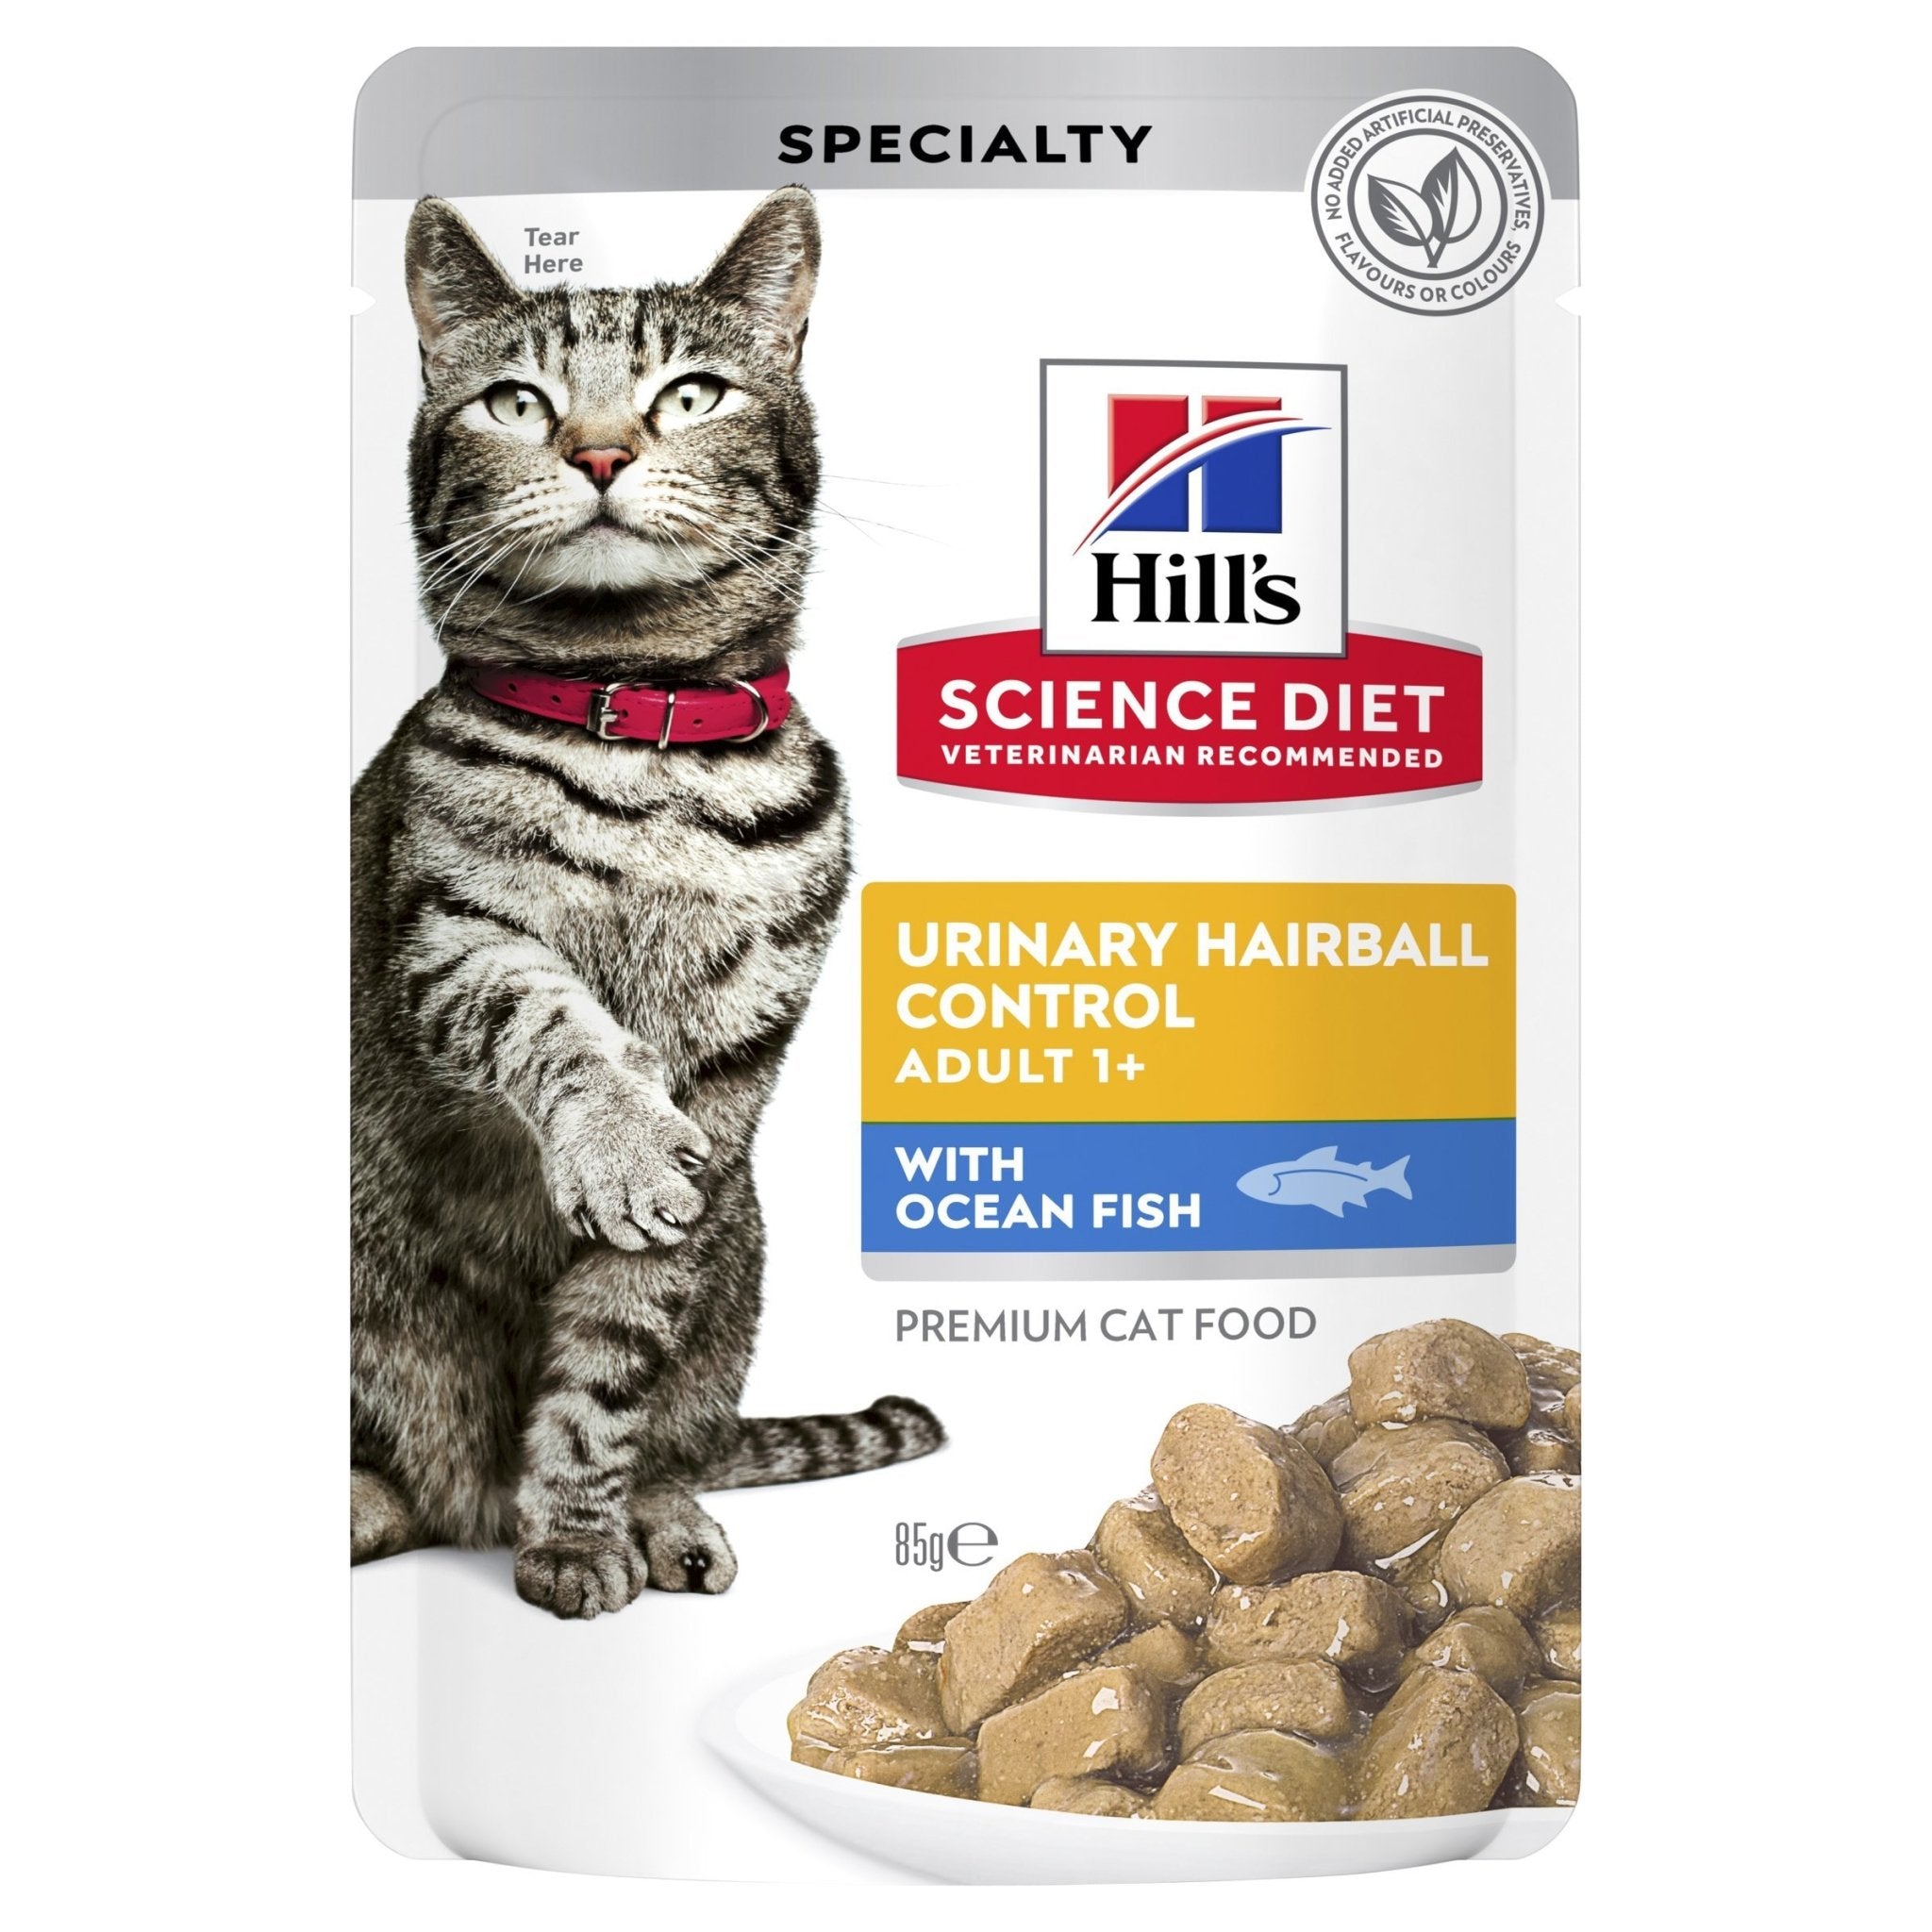 Hill's Science Diet Adult Urinary Hairball Control Ocean Fish Cat Food Pouches 85g